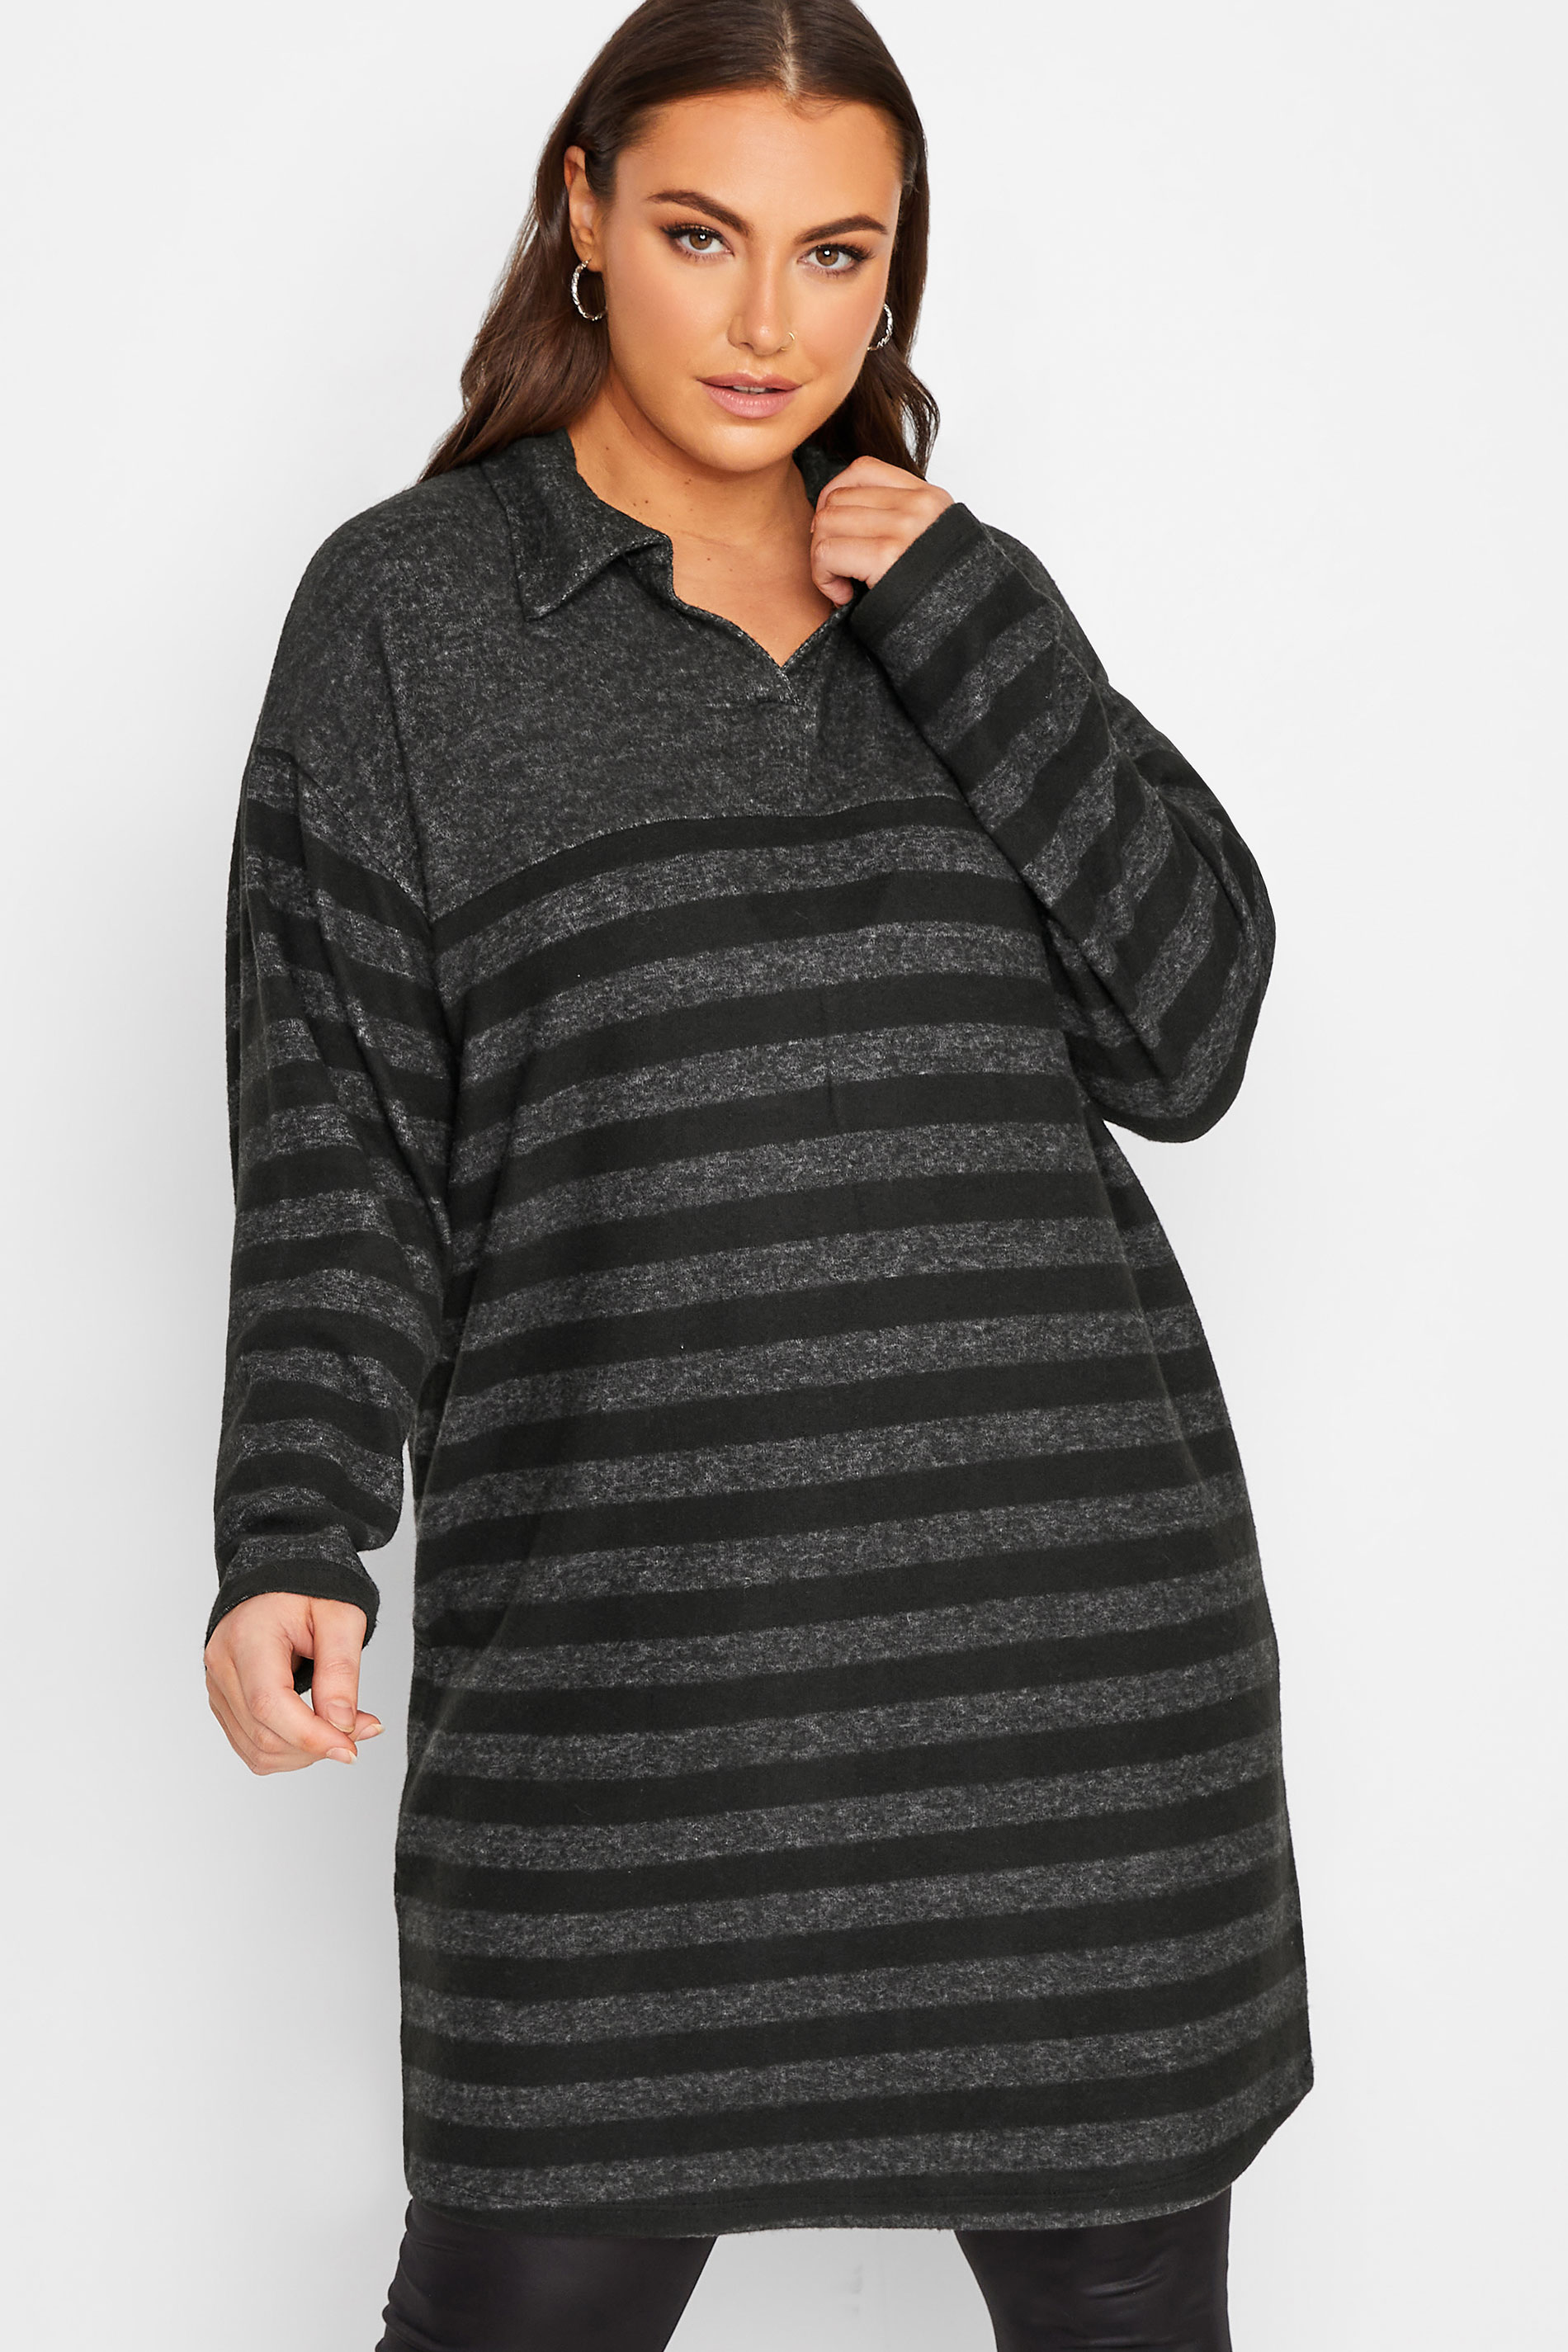 YOURS LUXURY Curve Black Stripe Open Collar Soft Touch Dress | Yours Clothing 1